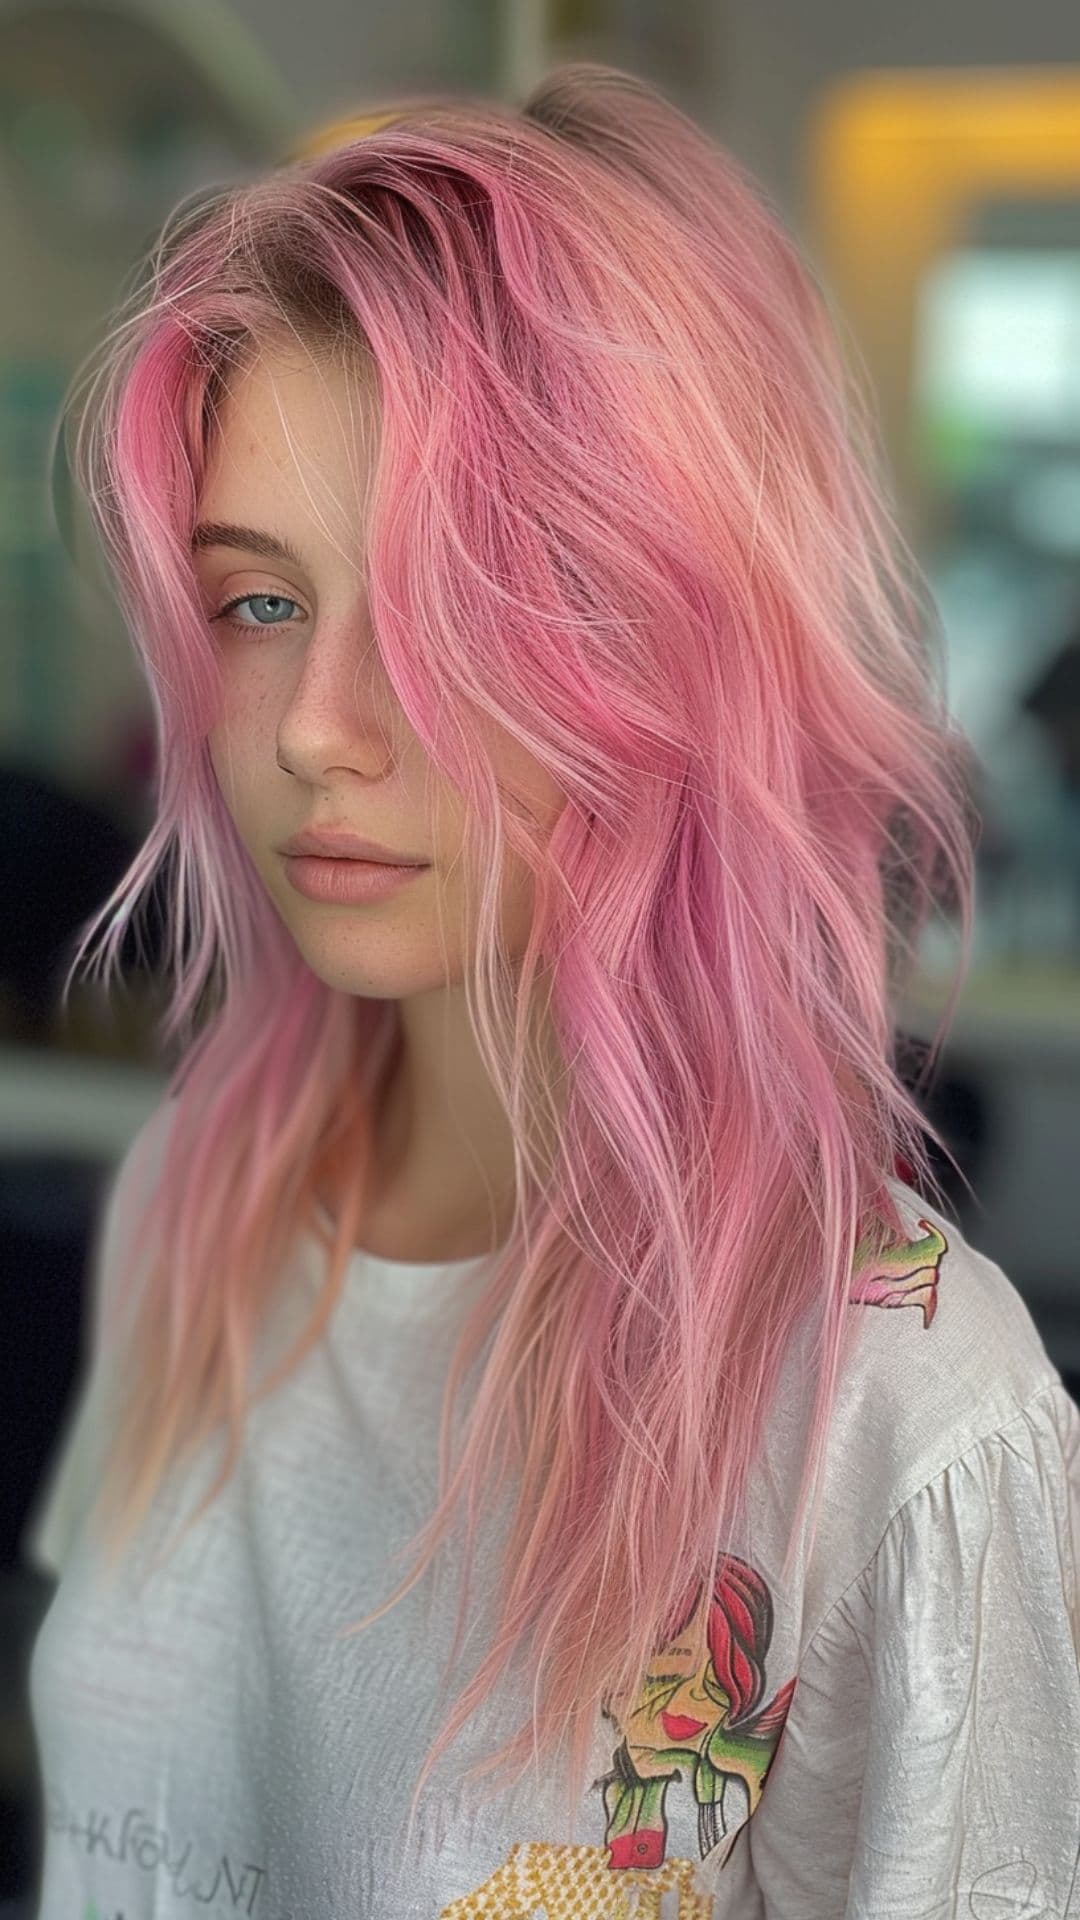 A young woman modelling a bubblegum pink hair.